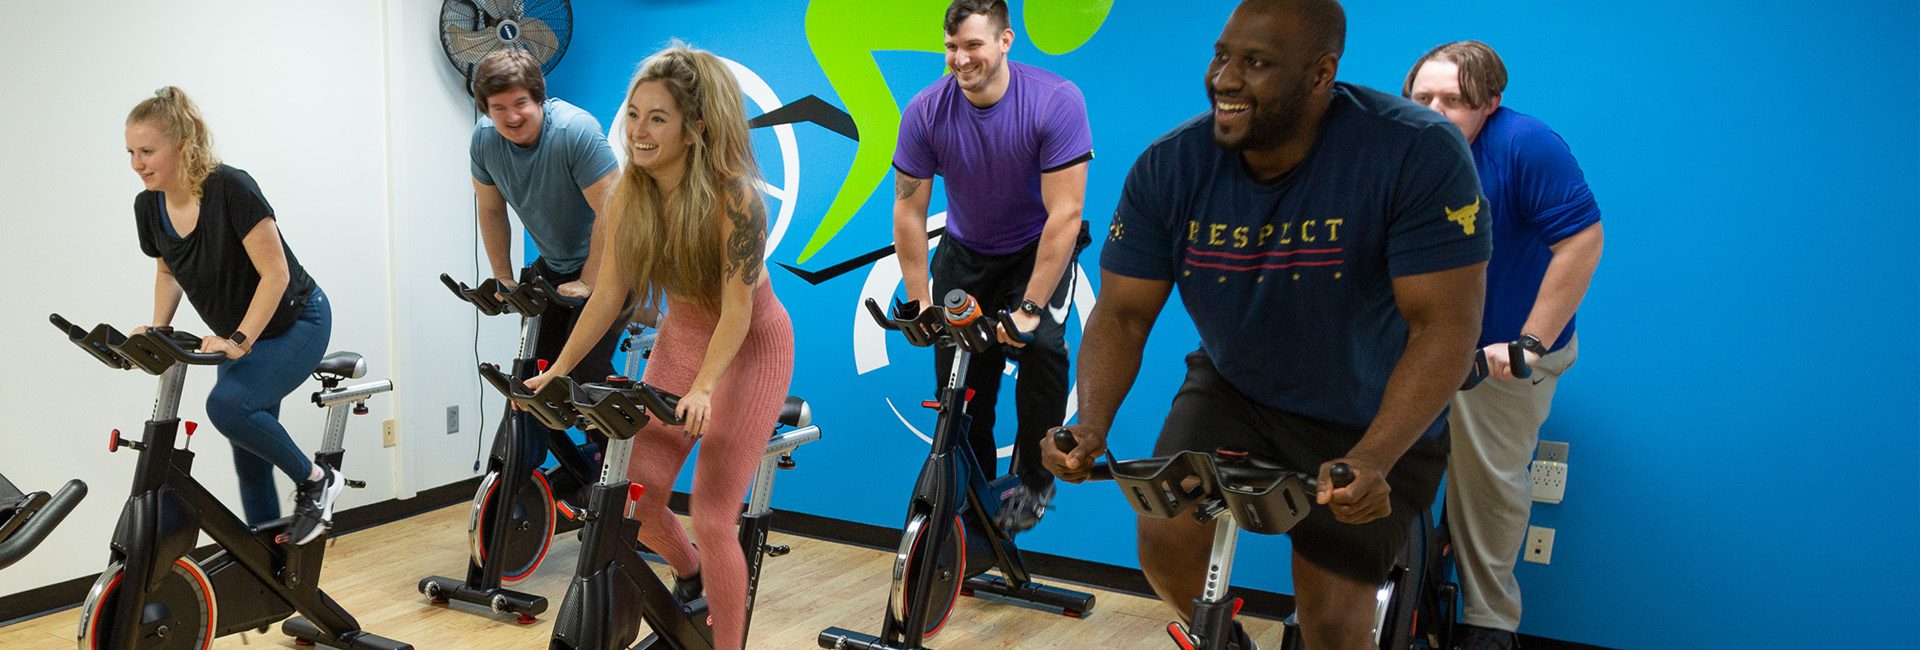 group cycling class studio at a gym in killian